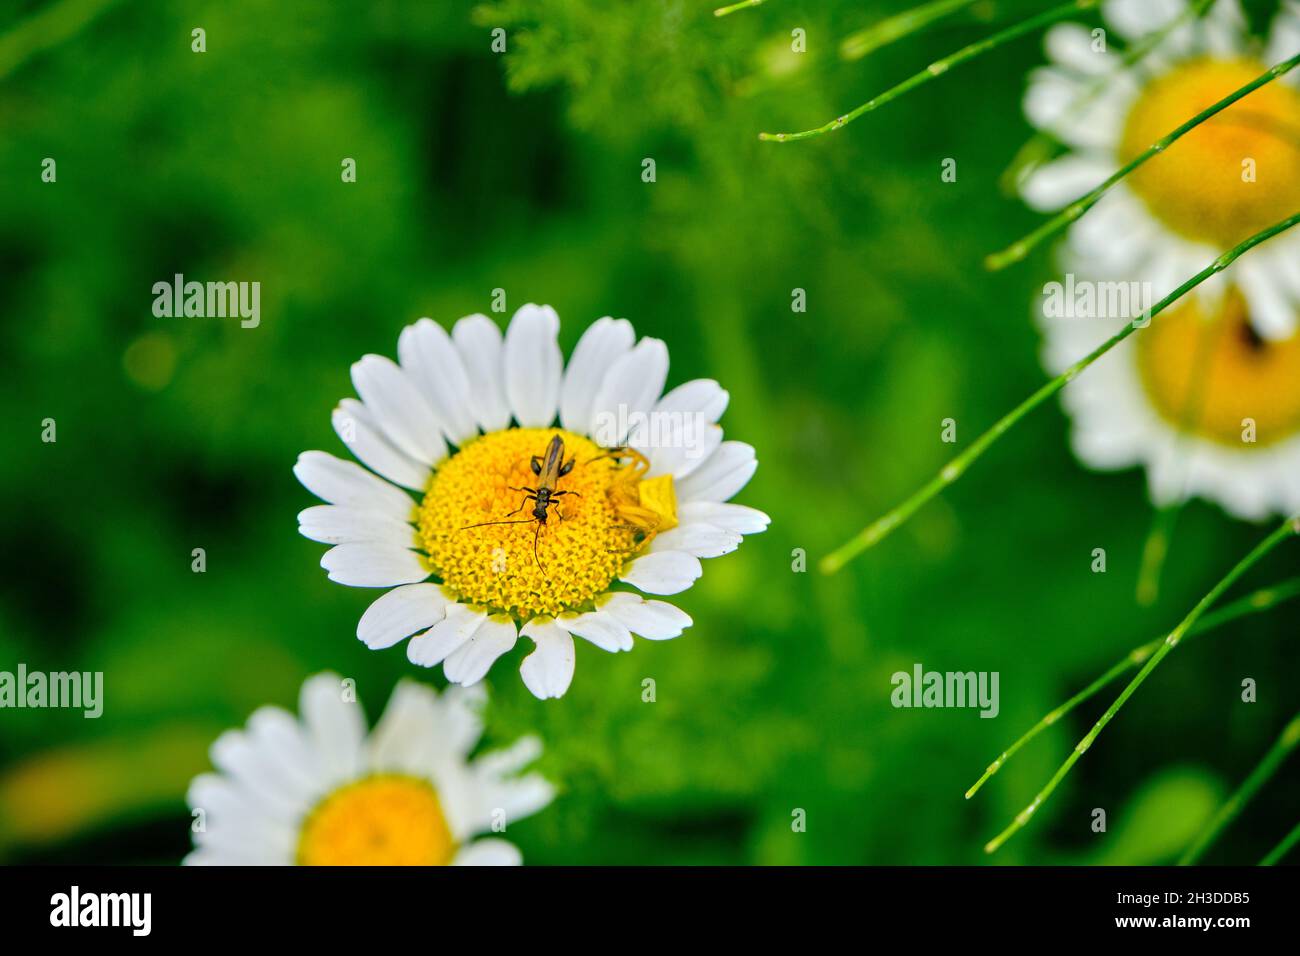 A great and huge daisy flower and a bee or kind of a spider on it with close up and macro photo in nature during spring time. Stock Photo